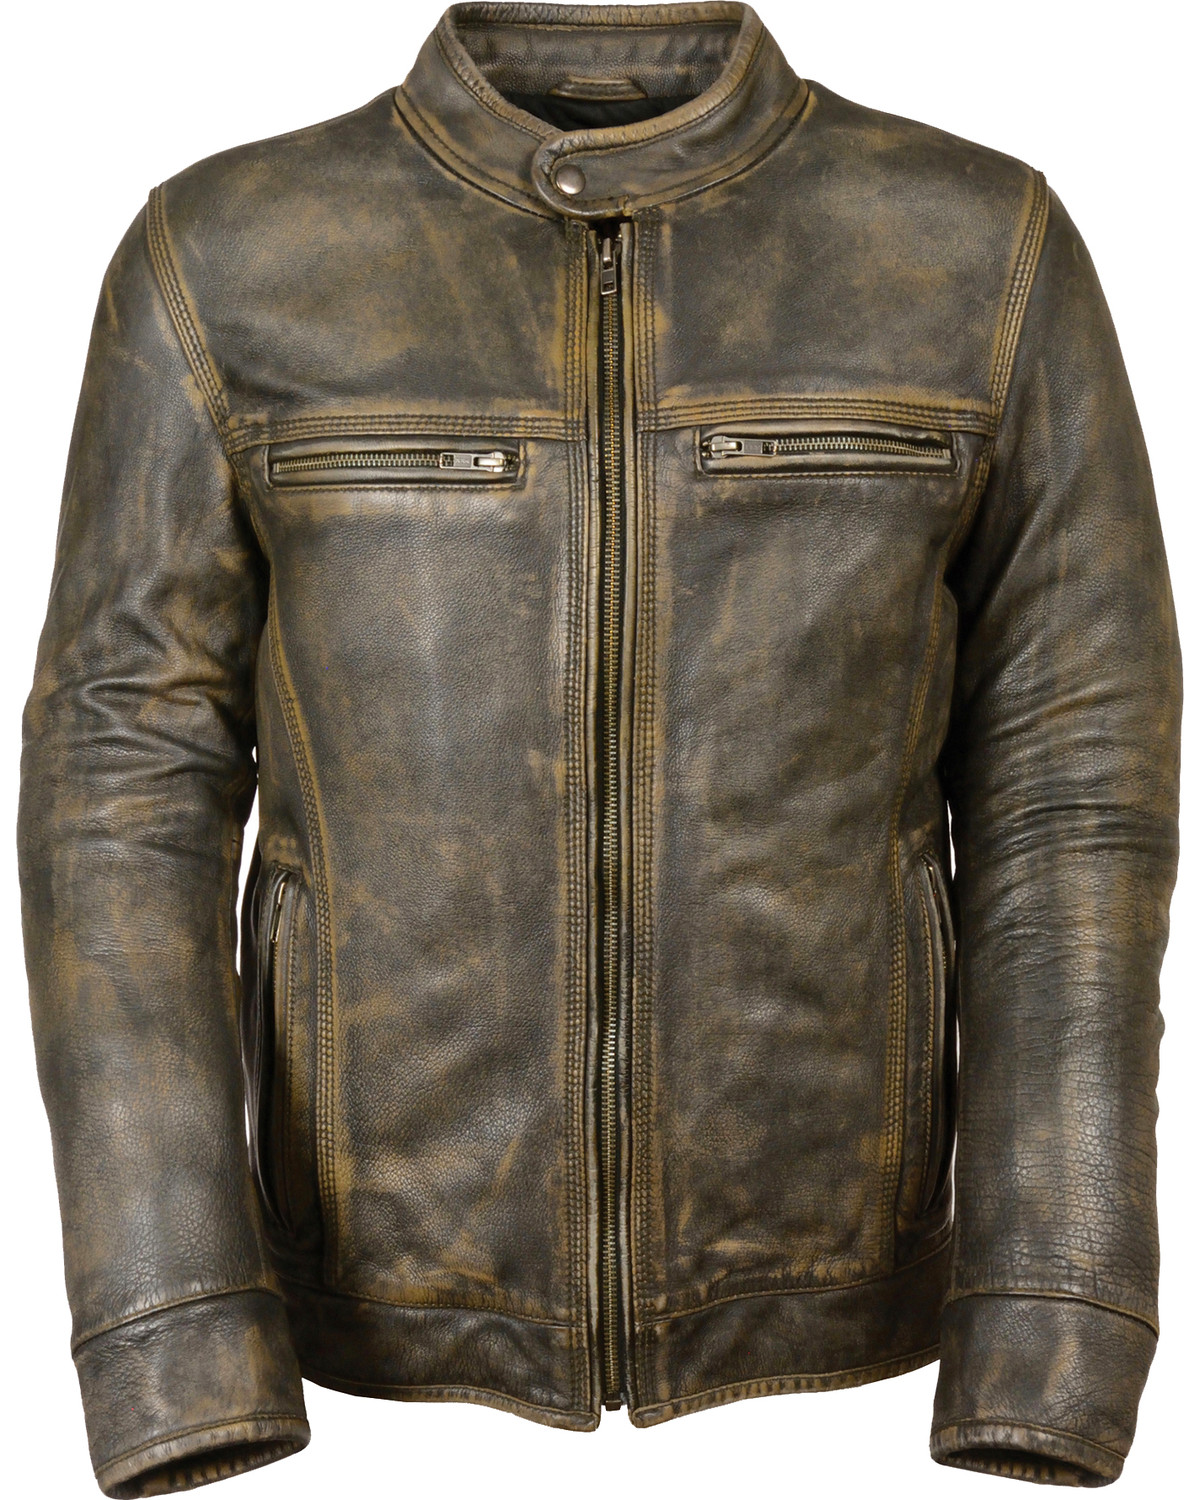 Milwaukee Leather Men's Distressed Scooter Jacket with Venting - Big